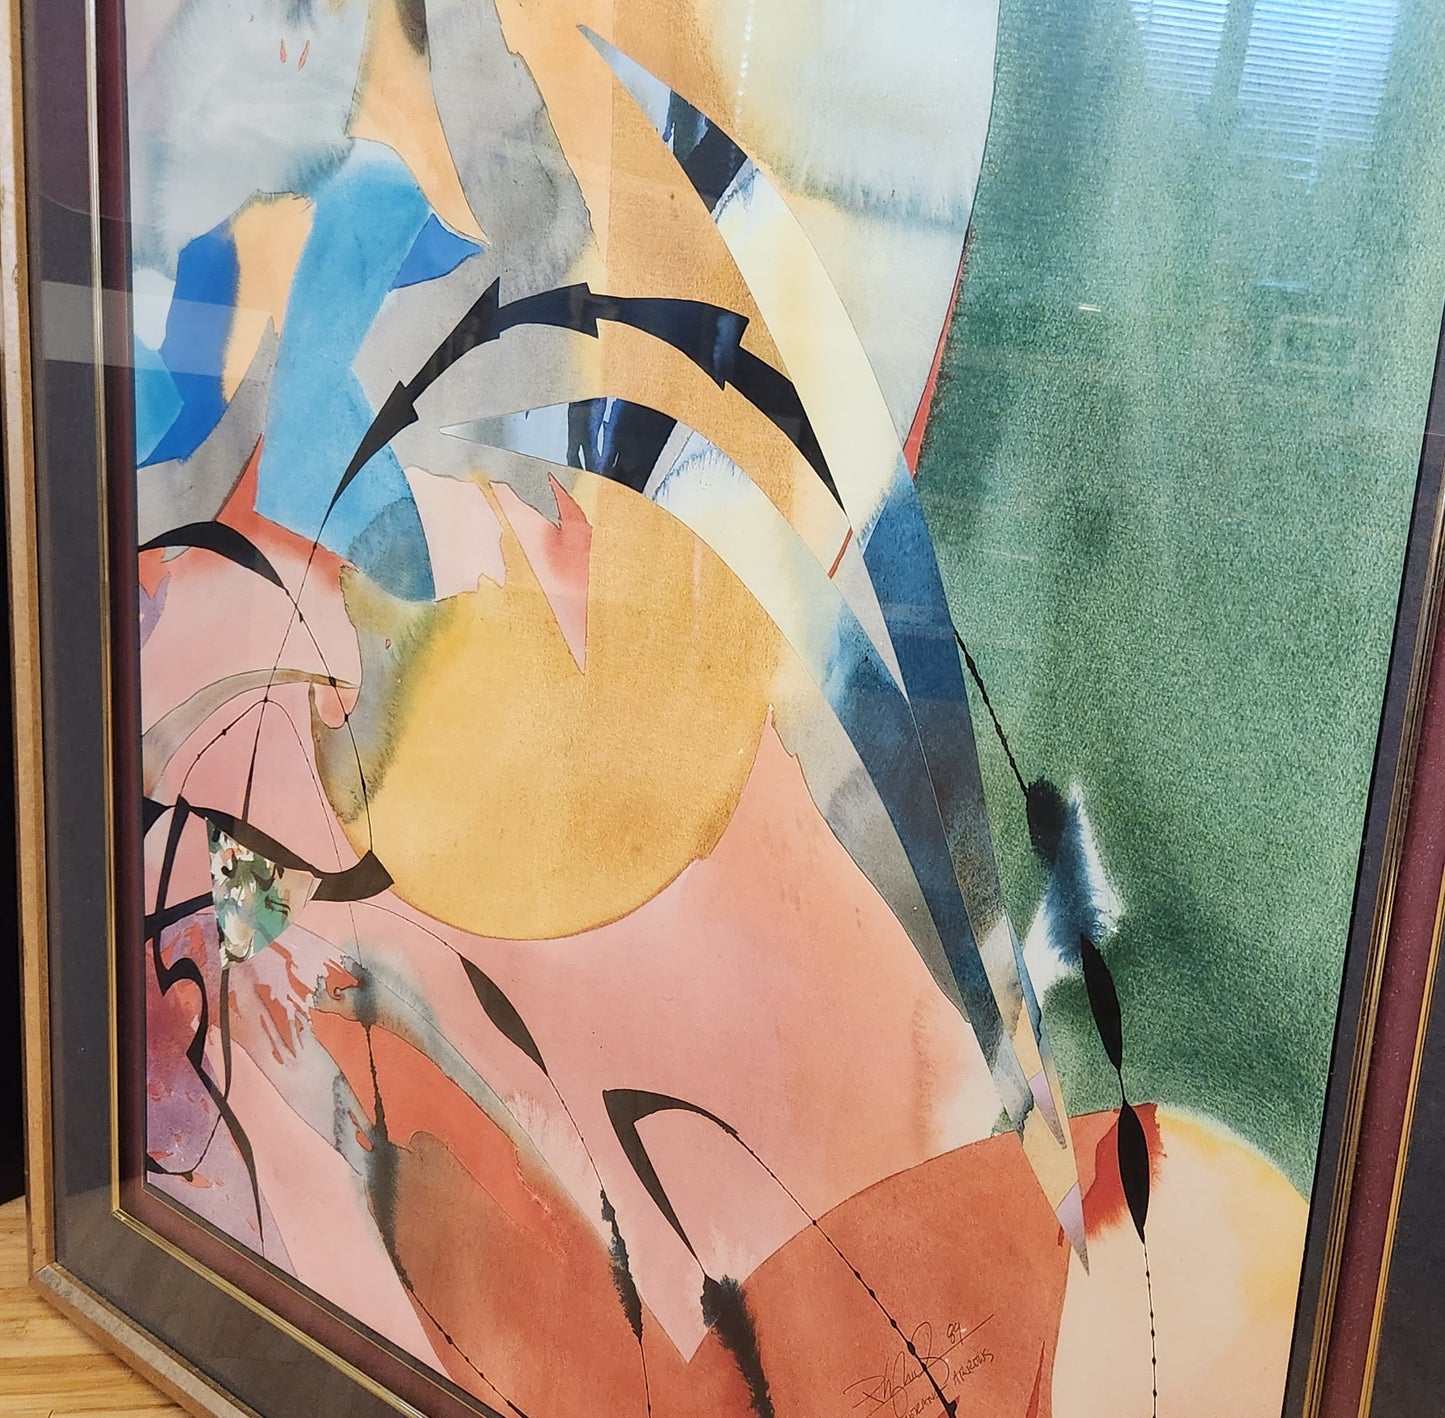 Peter Kitchell Signed & Dated "Boomerang Arrows" Postmodern Artwork